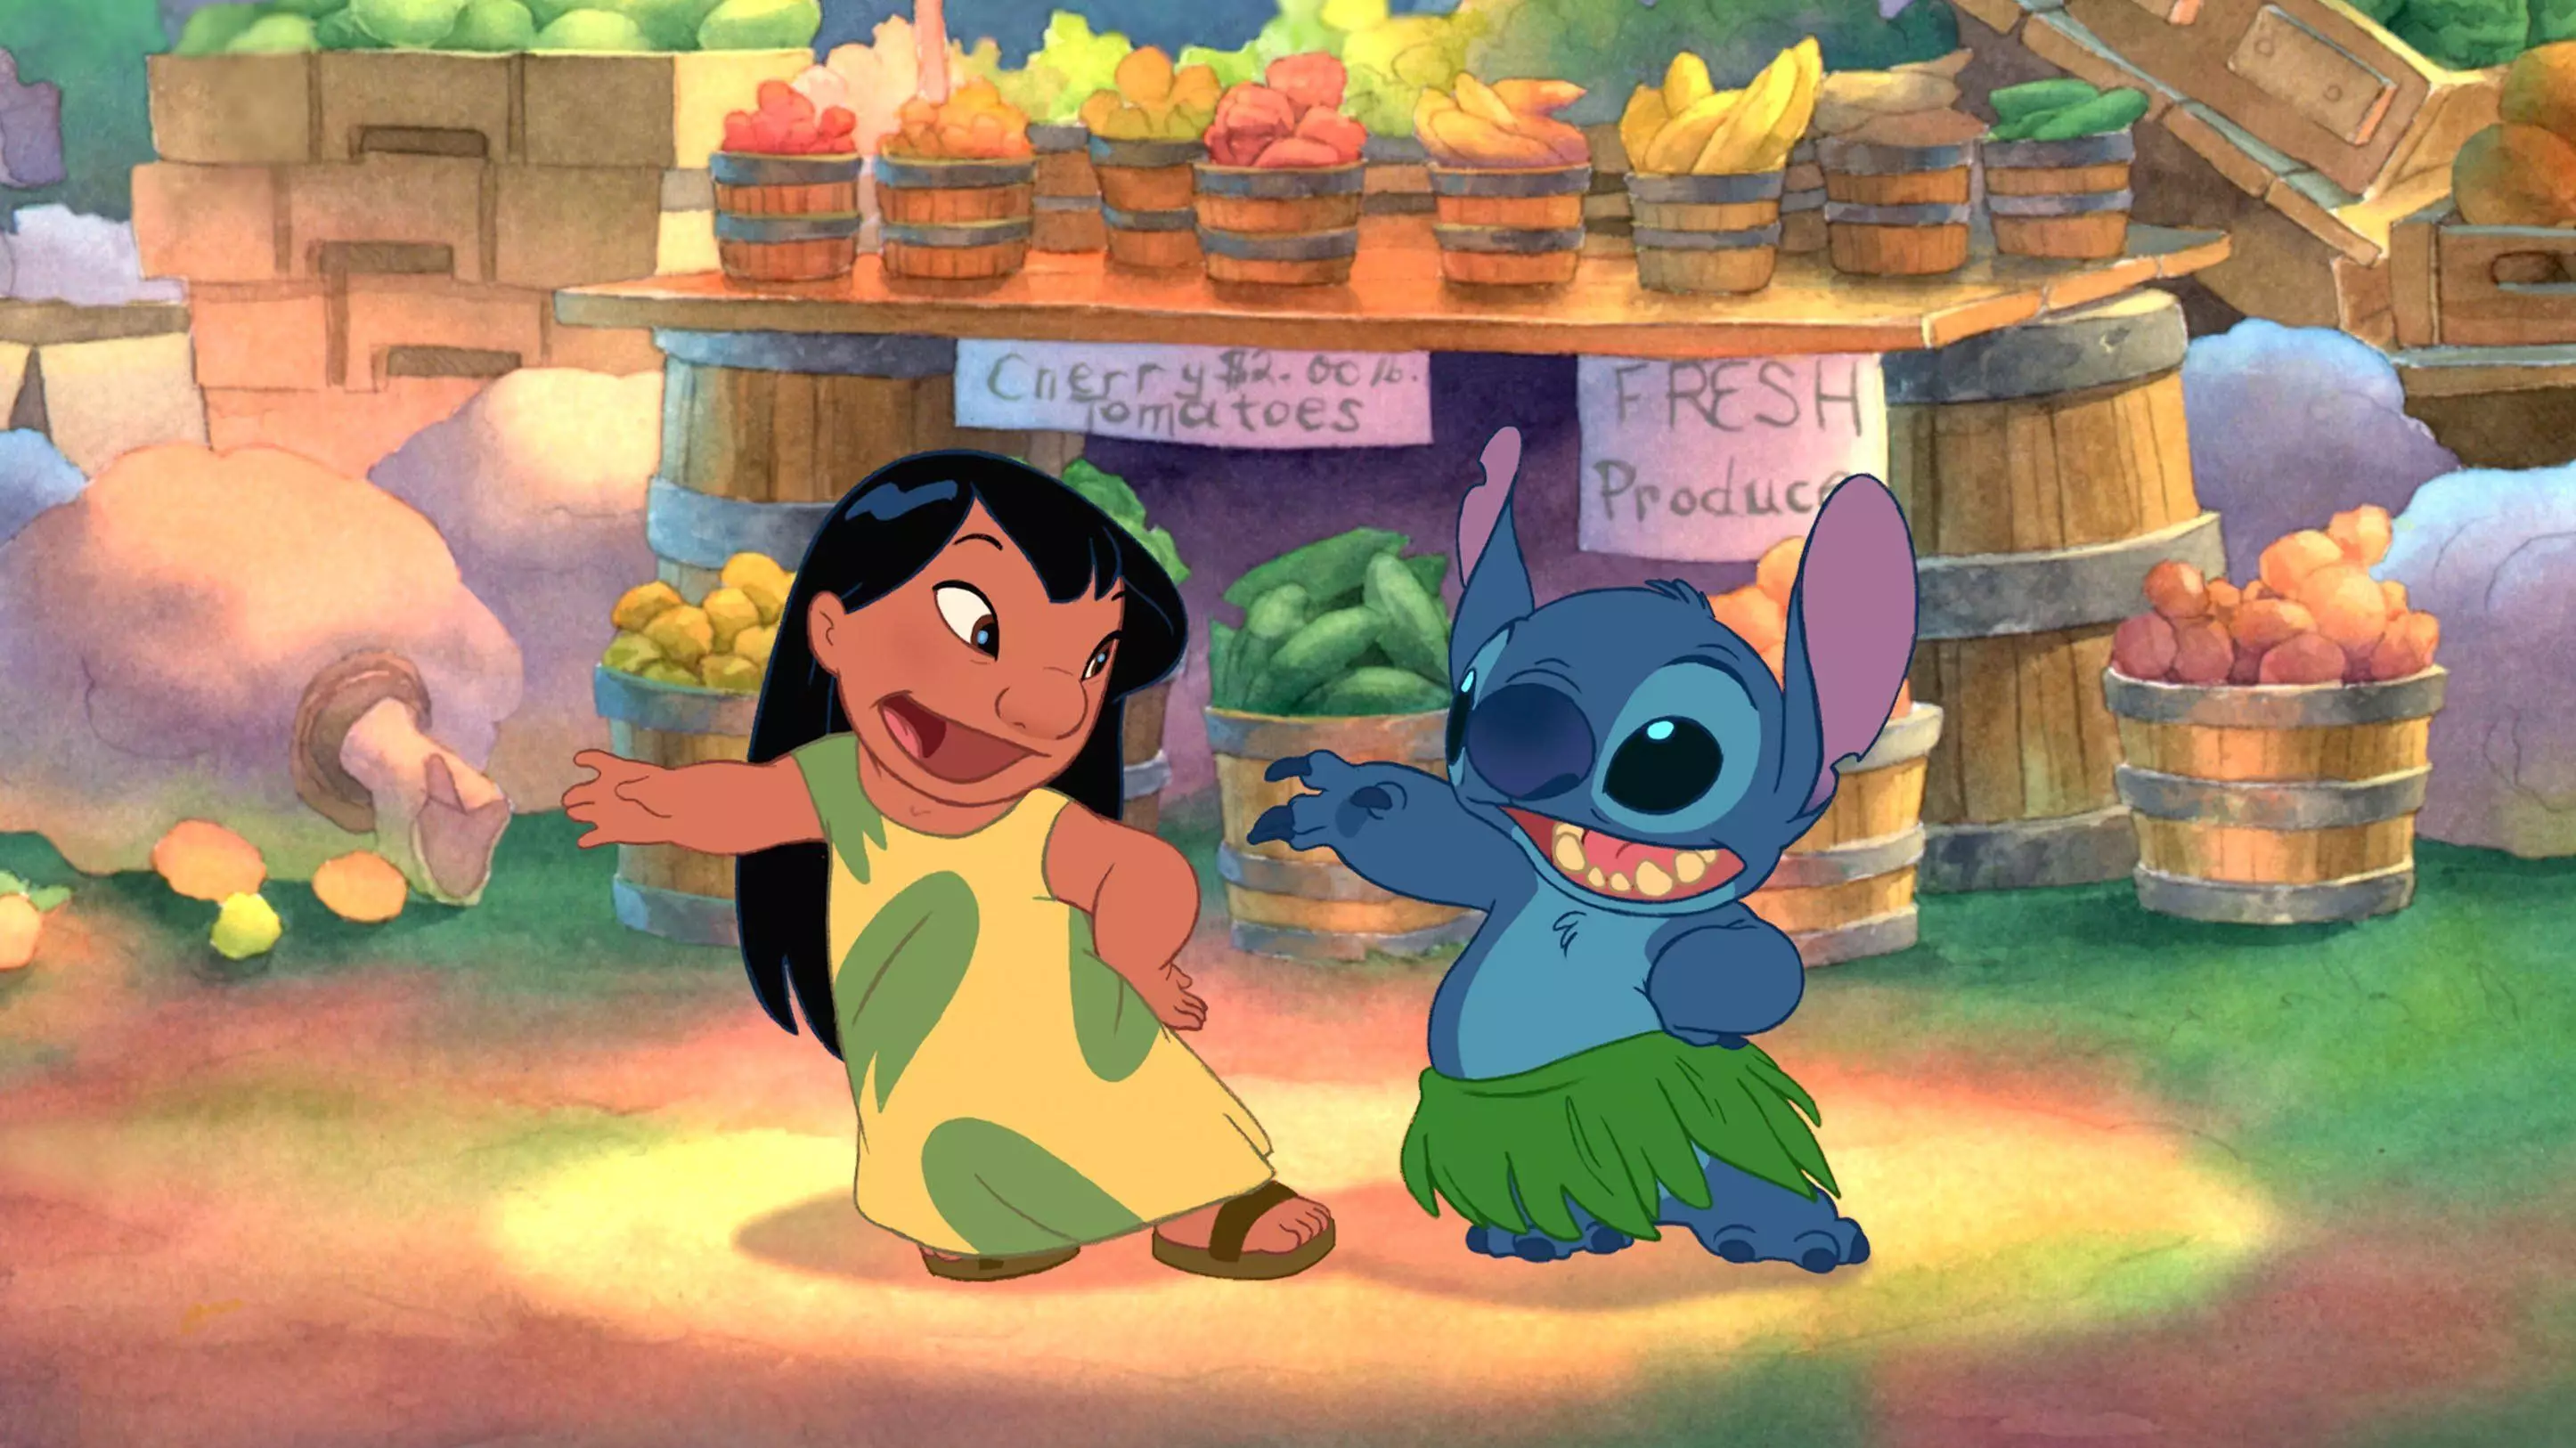 Crazy Rich Asians Director To Direct Disney’s New Live-Action Lilo & Stitch Remake